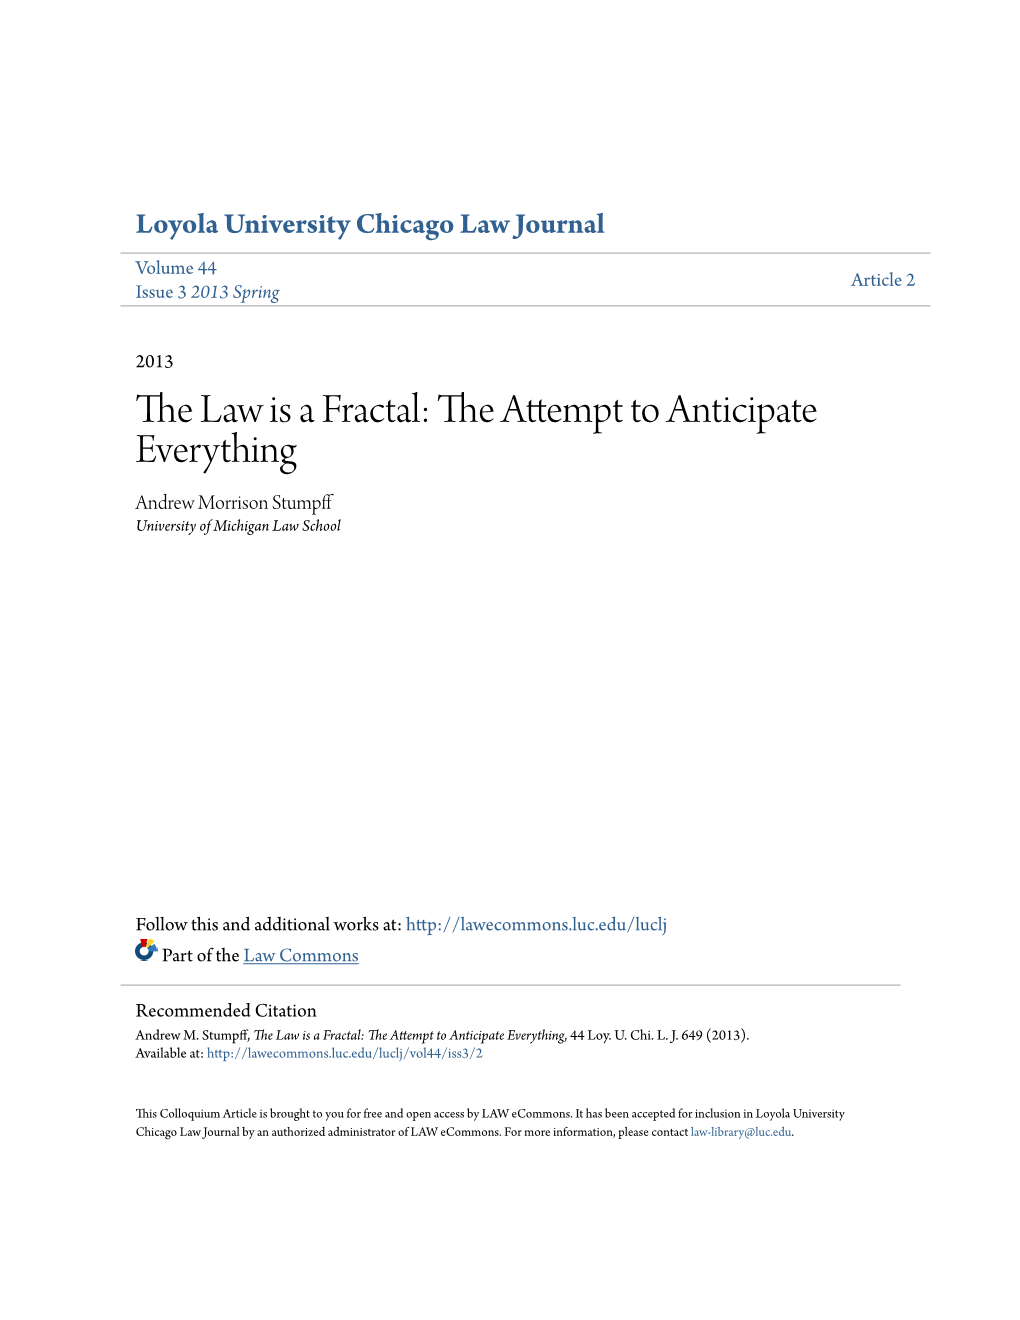 The Law Is a Fractal: the Attempt to Anticipate Everything Andrew Morrison Stumpff University of Michigan Law School